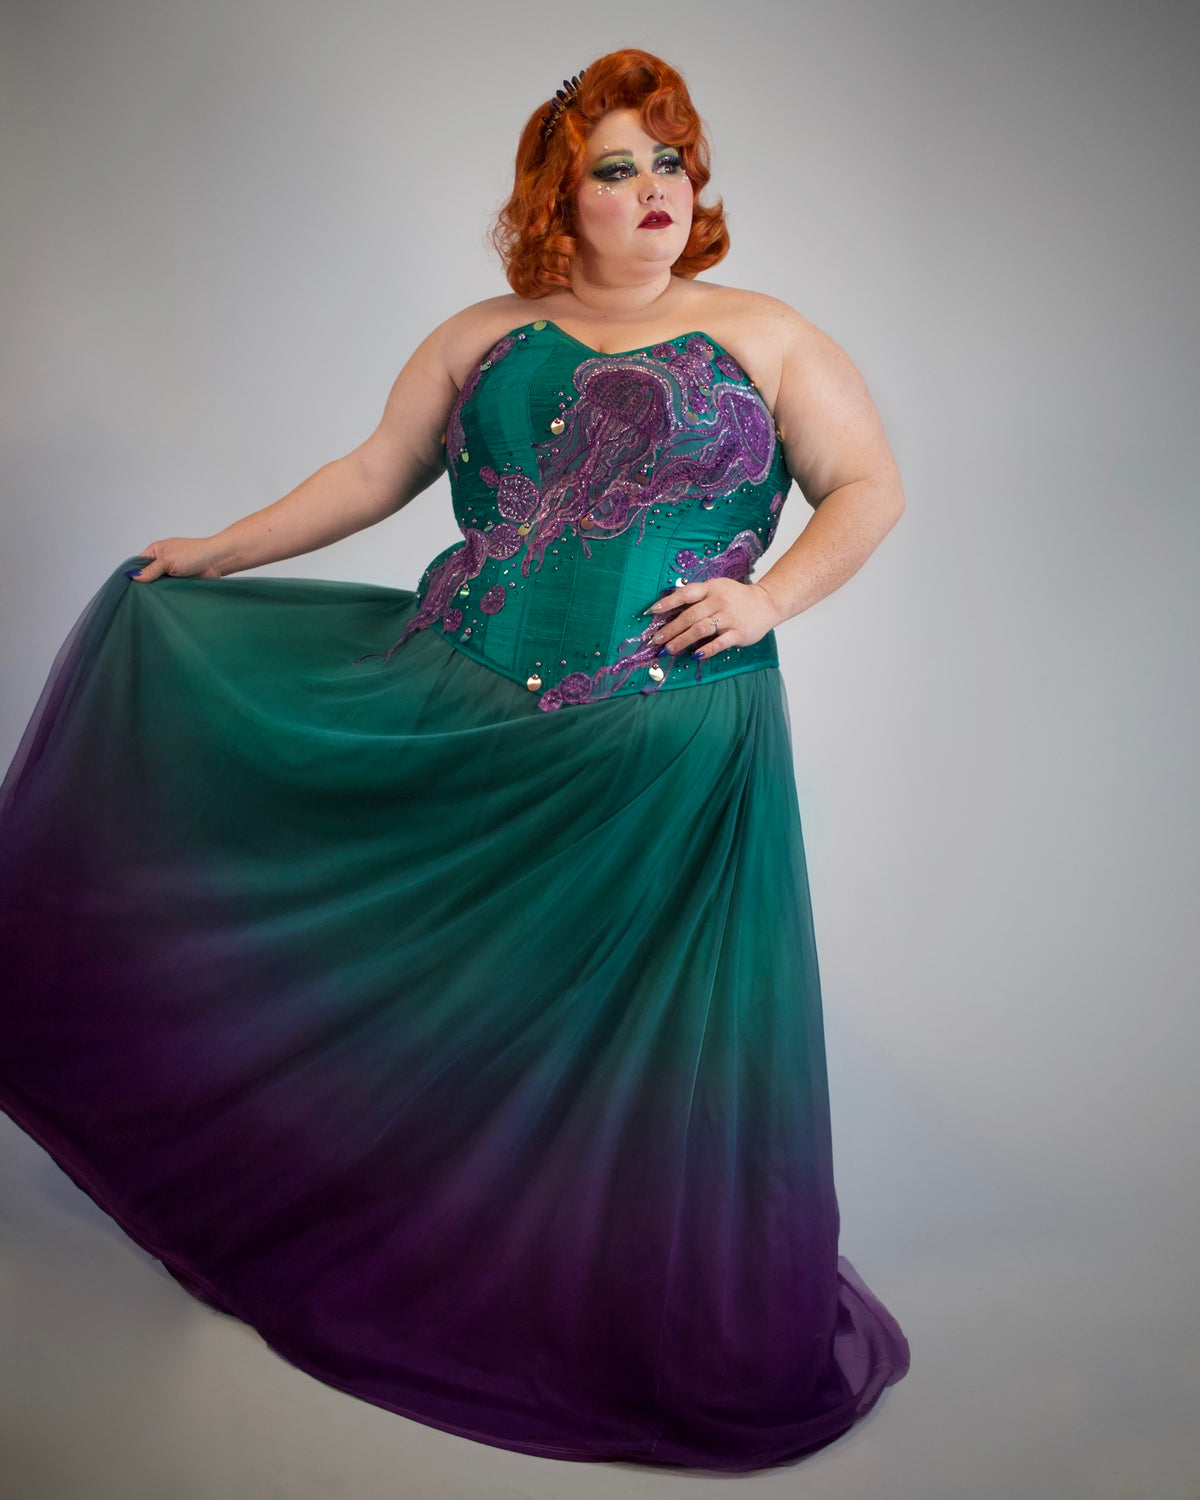 Custom Jellyfish Gown - Made to Order